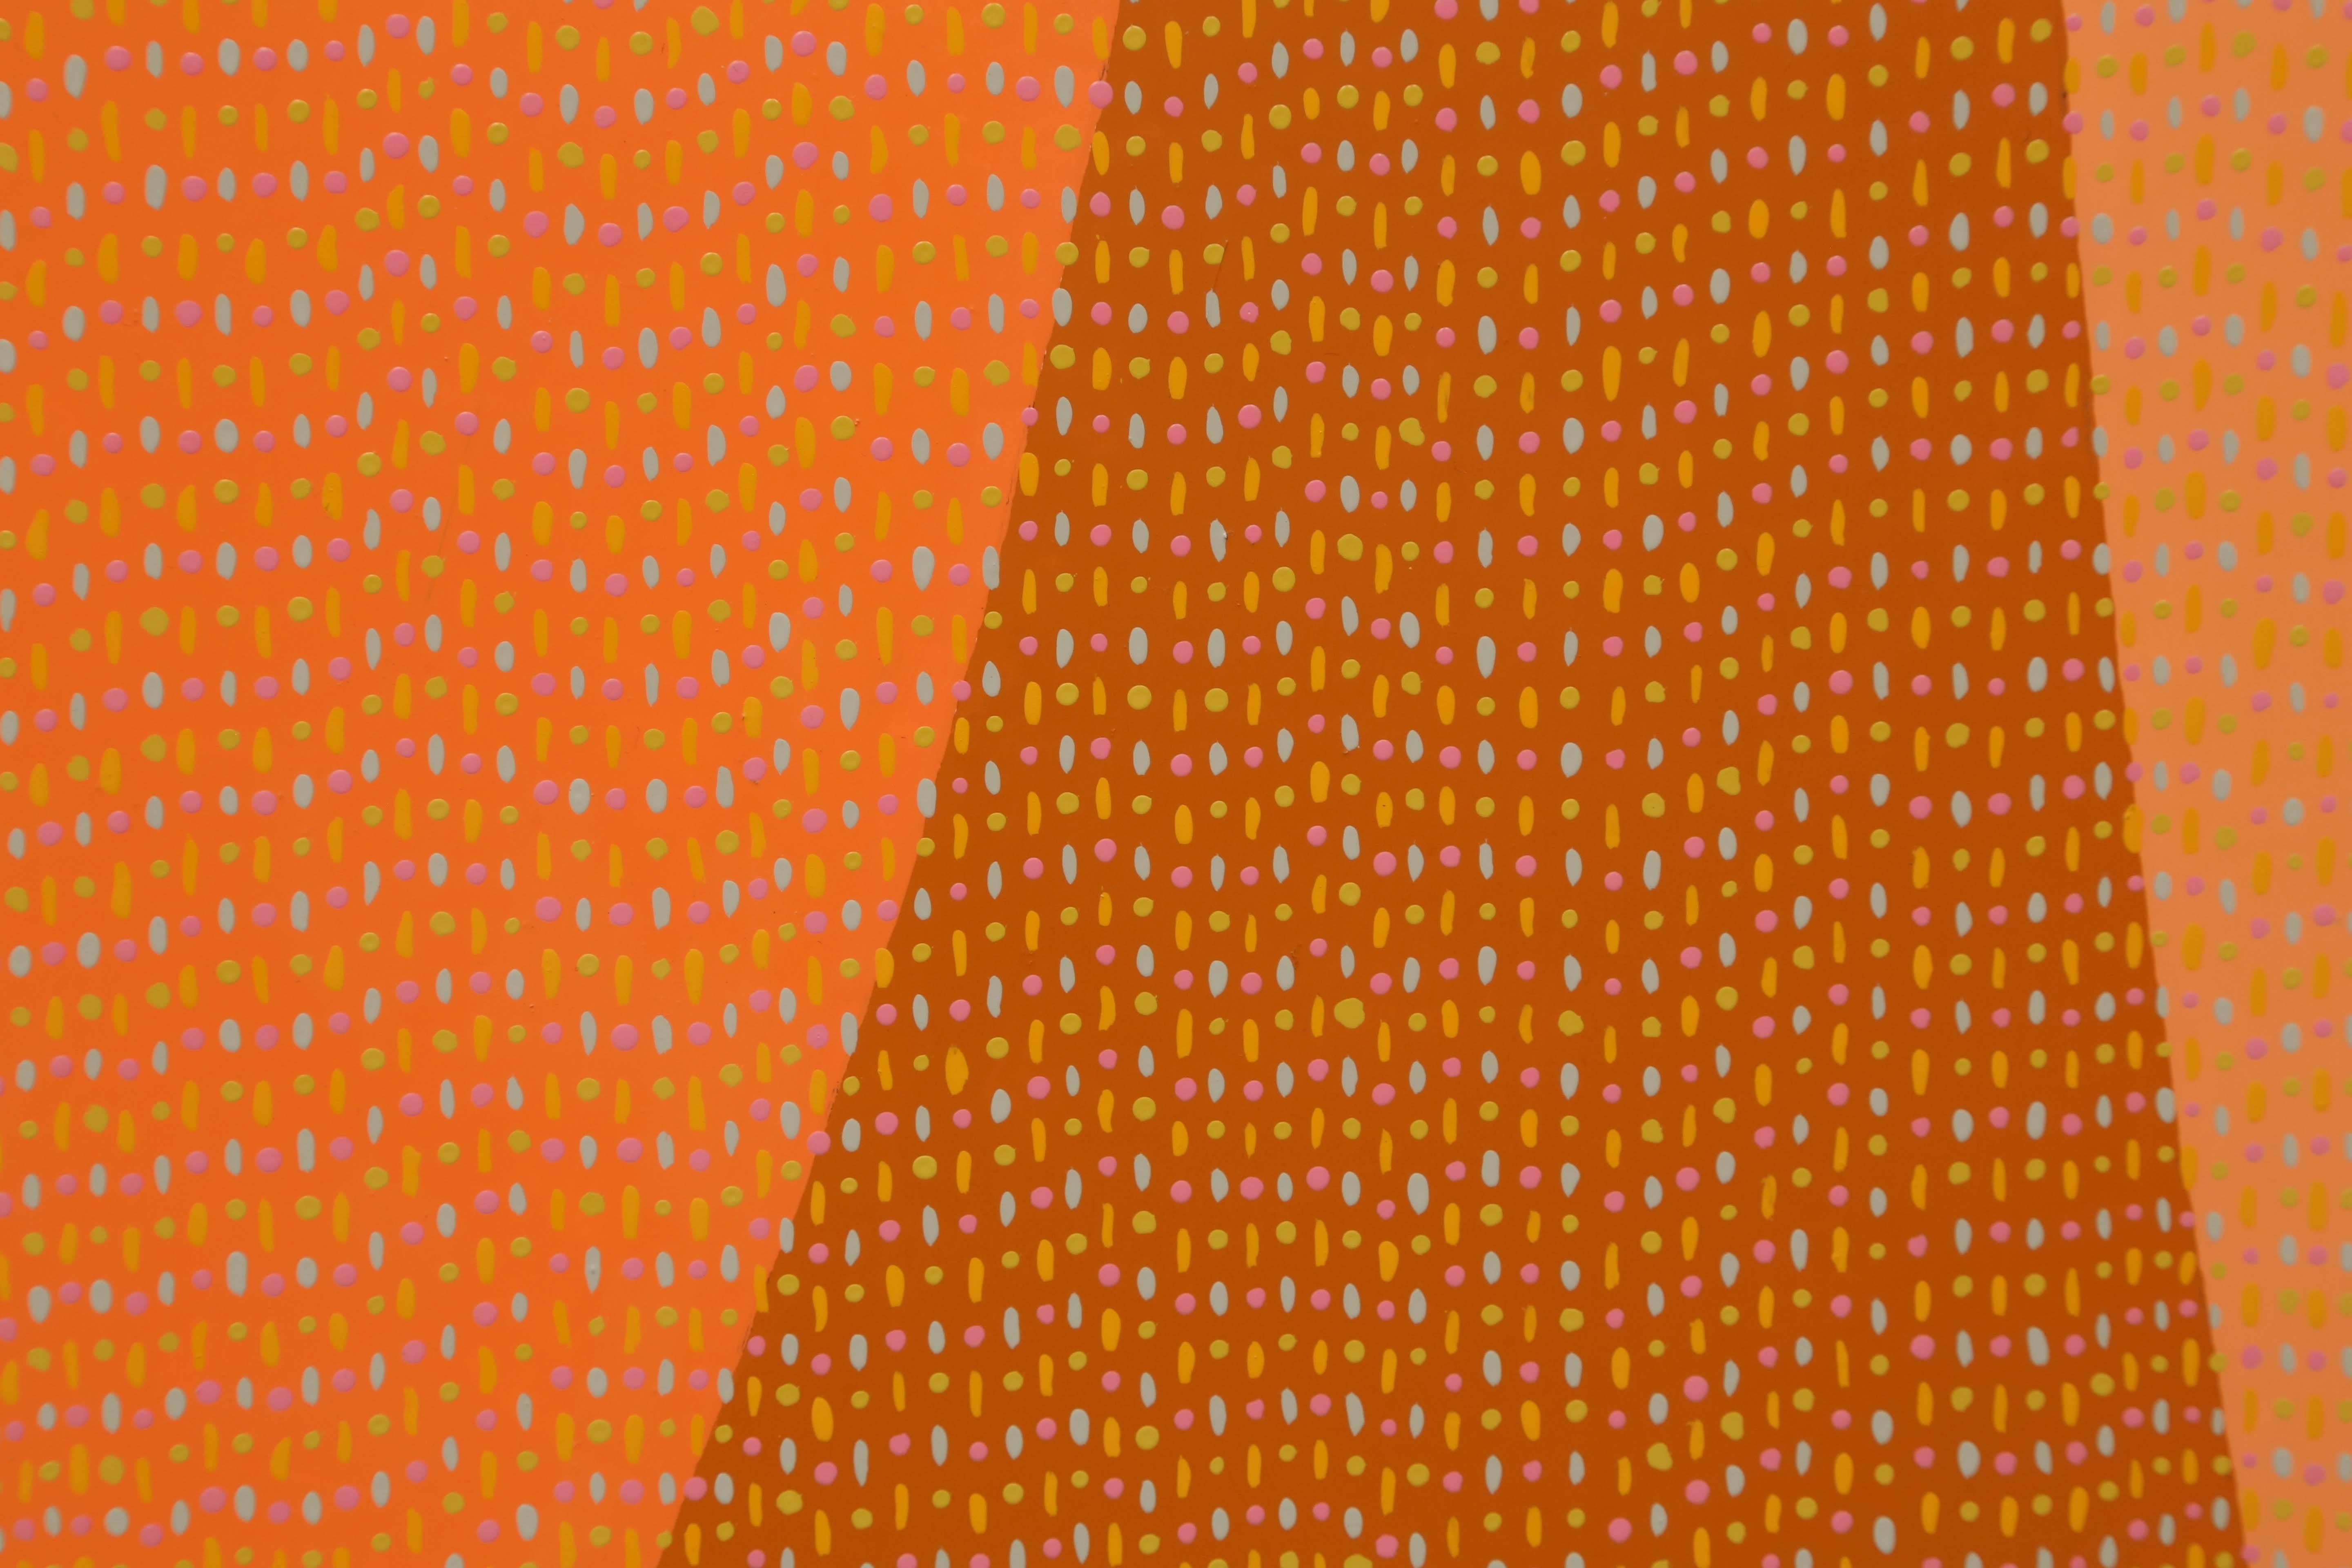 North American Pointillism Orange Enamel Painting on Aluminum Sheet by James Goodwill For Sale